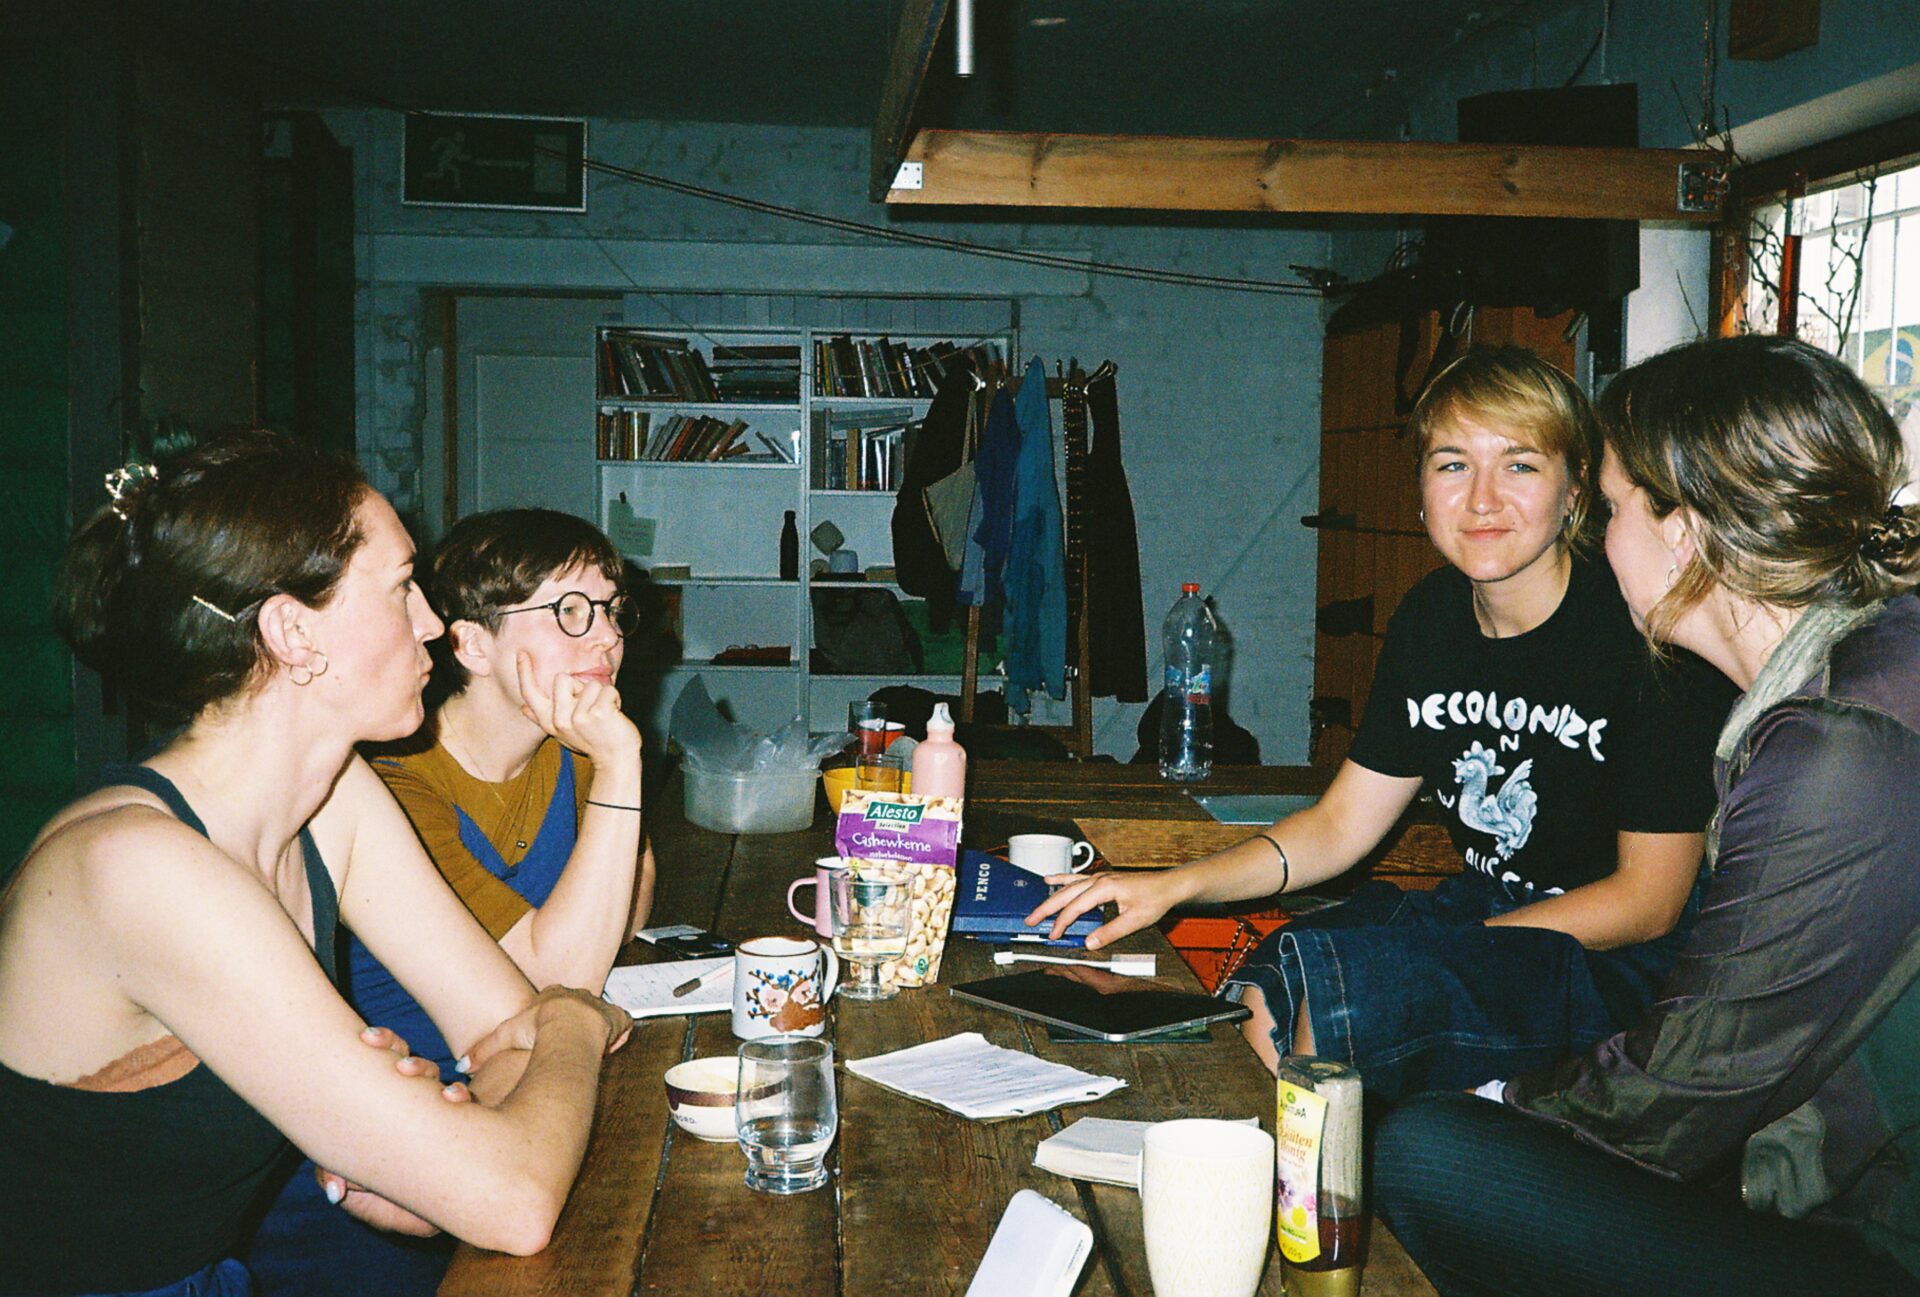 A color photo of four persons, including Samantha Lippett and Ieva Gudaitylė, sitting at a table for an ICRN meeting. Three of them look at the fourth who is speaking.